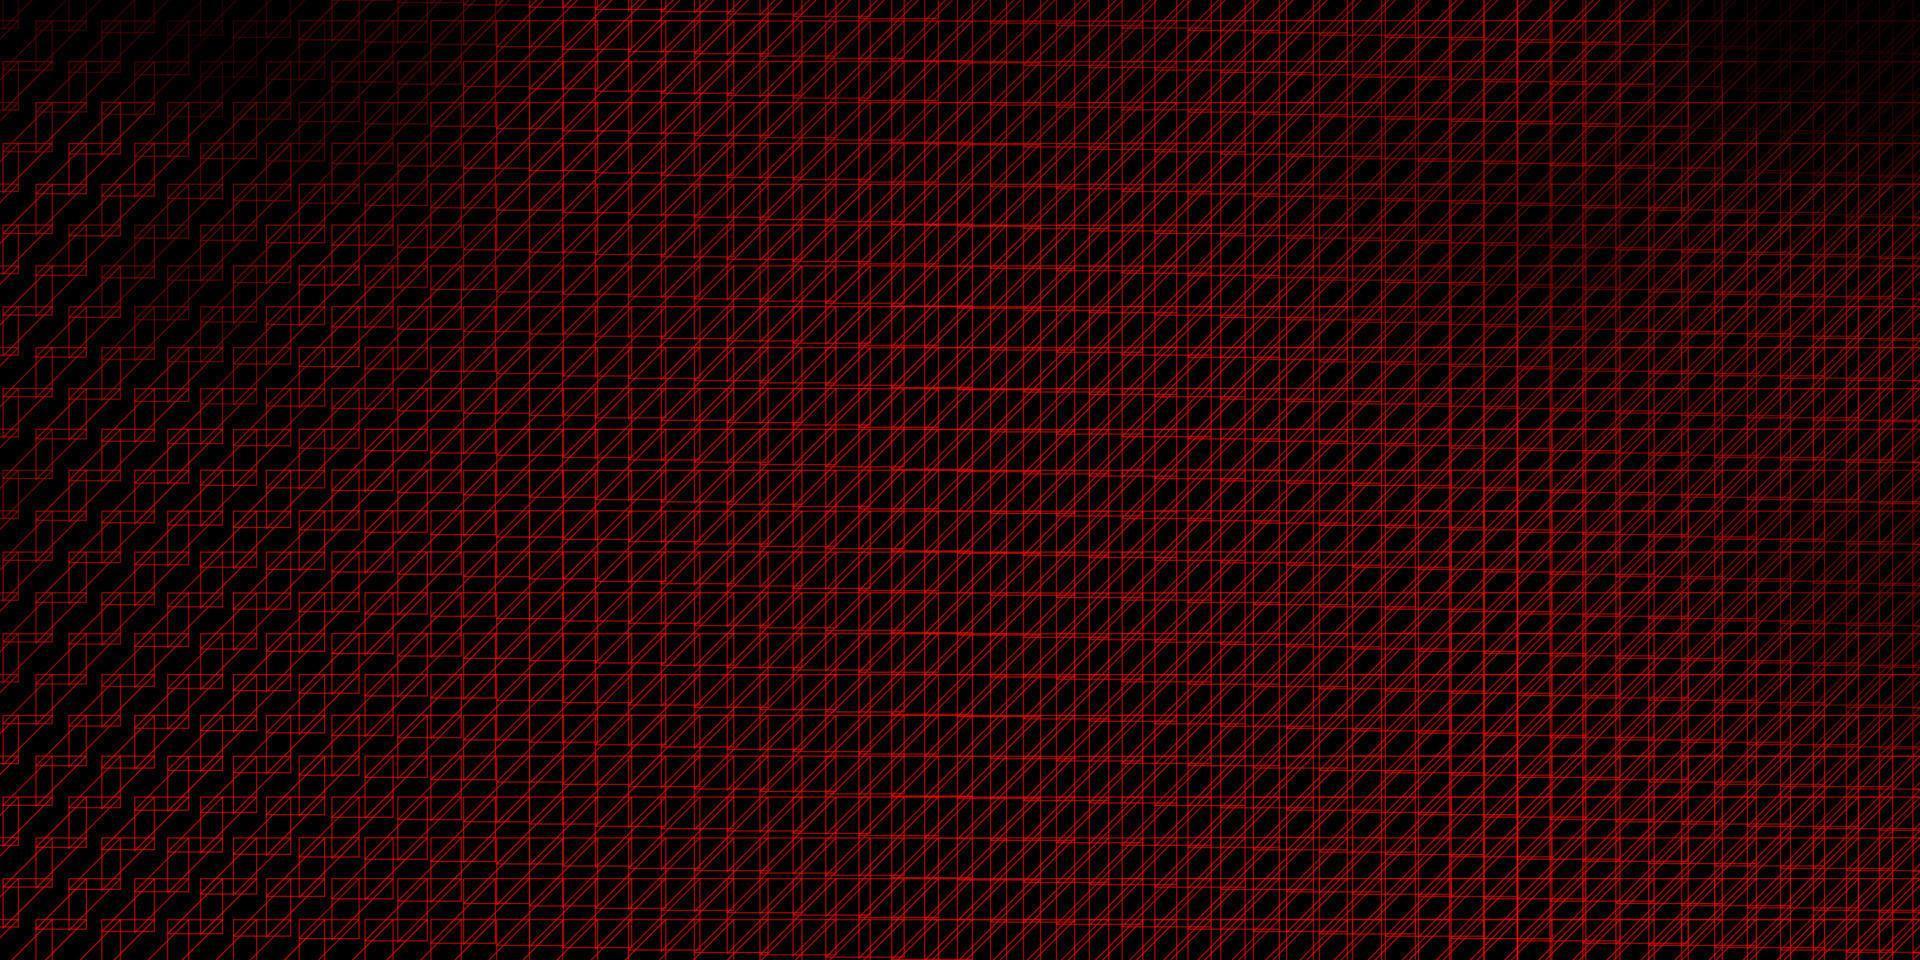 Dark Red vector background with lines.